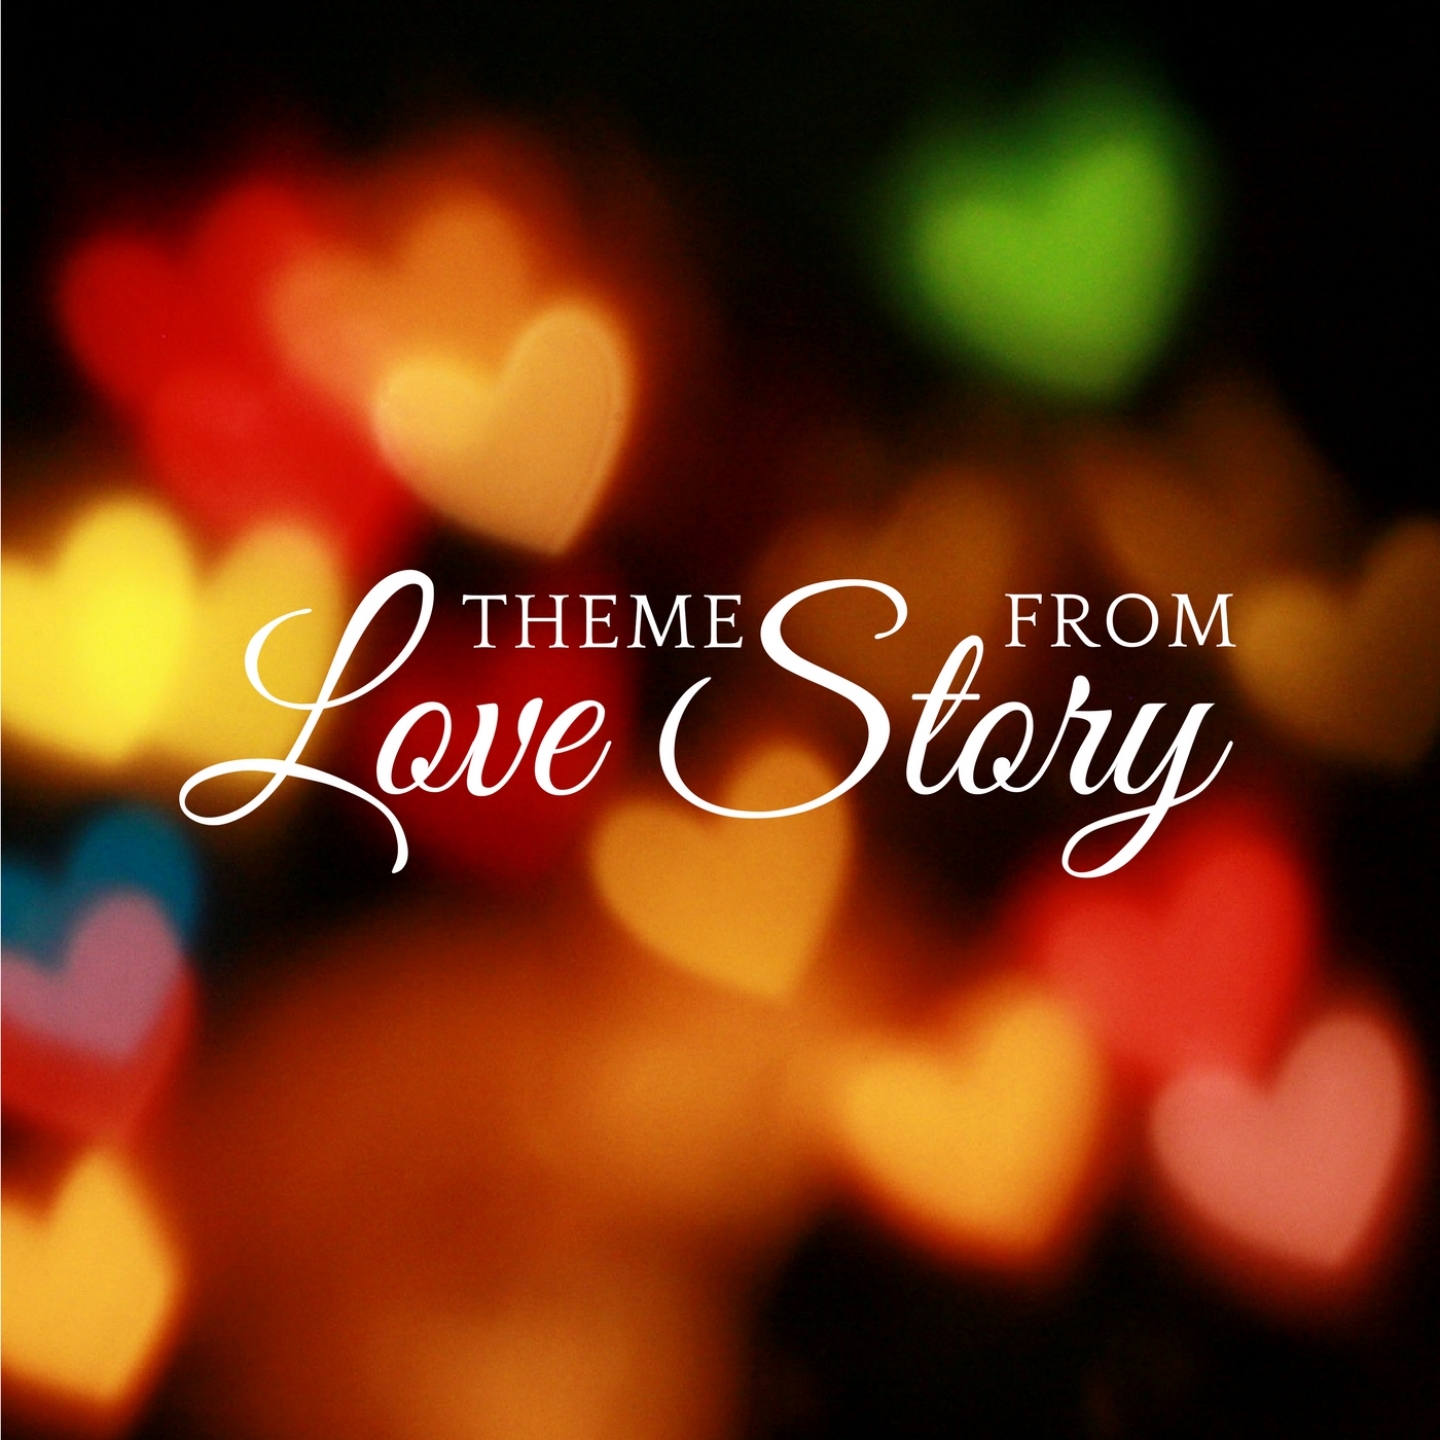 Theme from Love Story